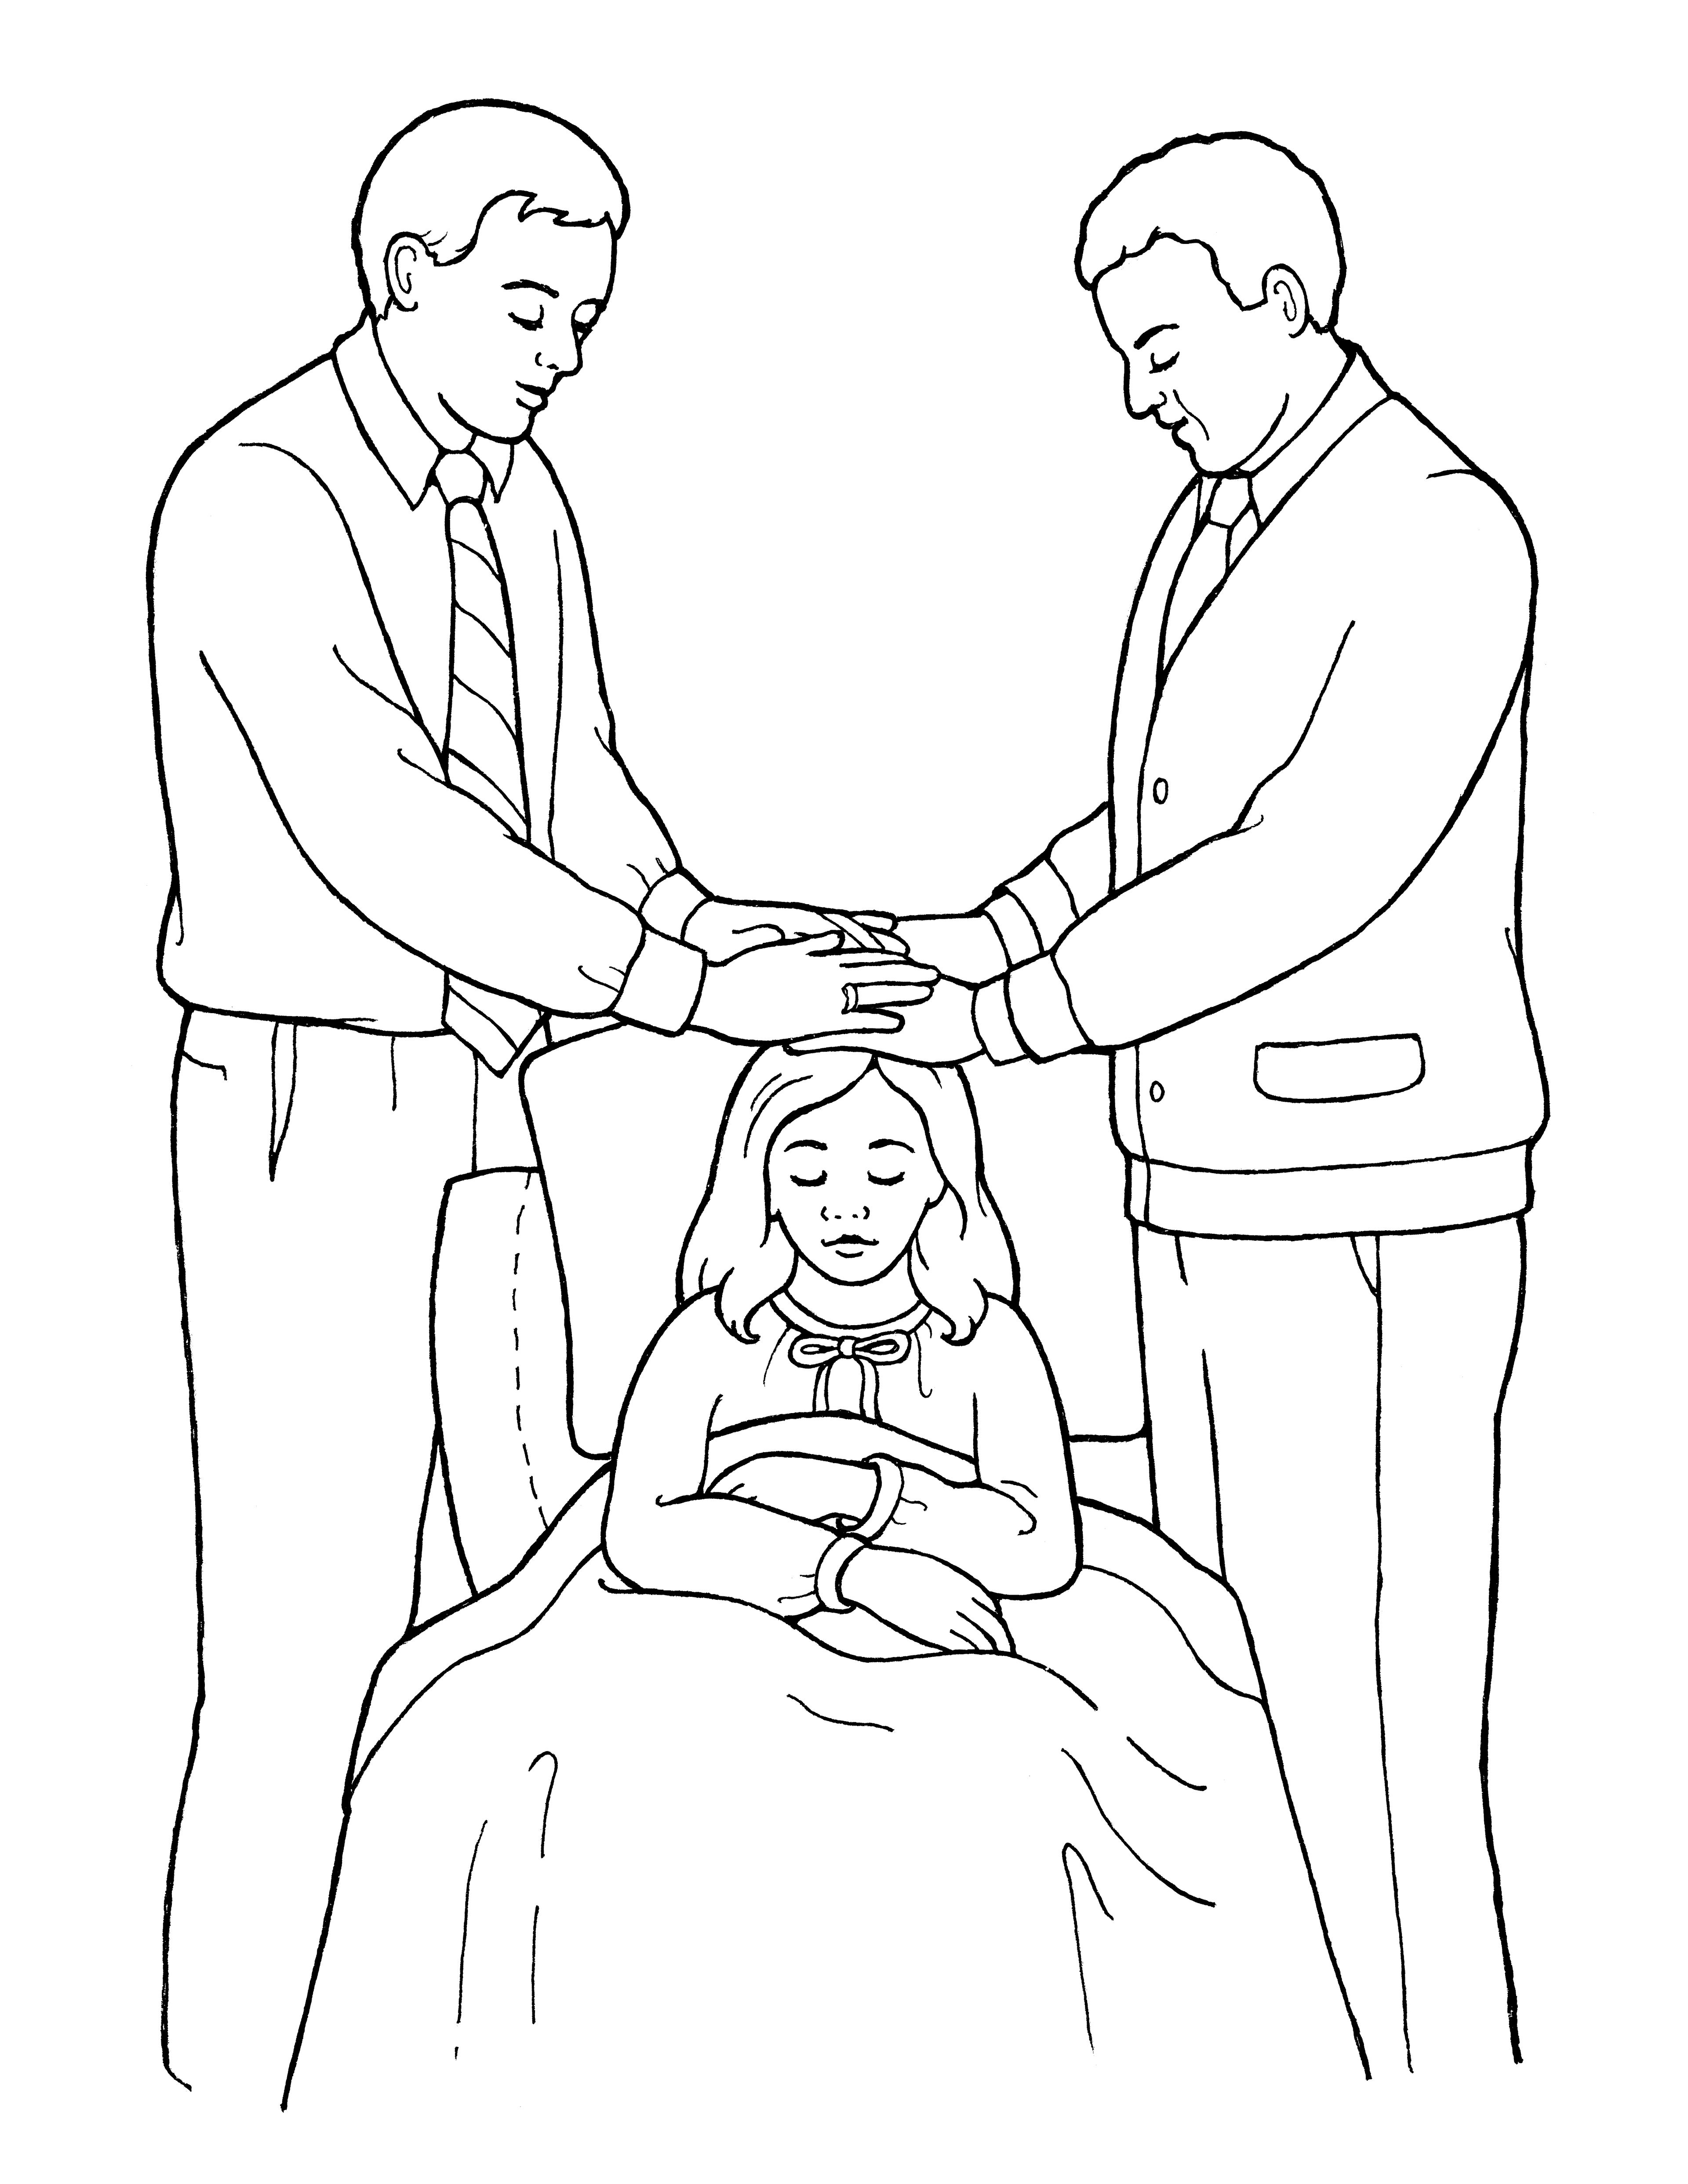 An illustration of two men blessing a sick girl, from the nursery manual Behold Your Little Ones (2008), page 119.